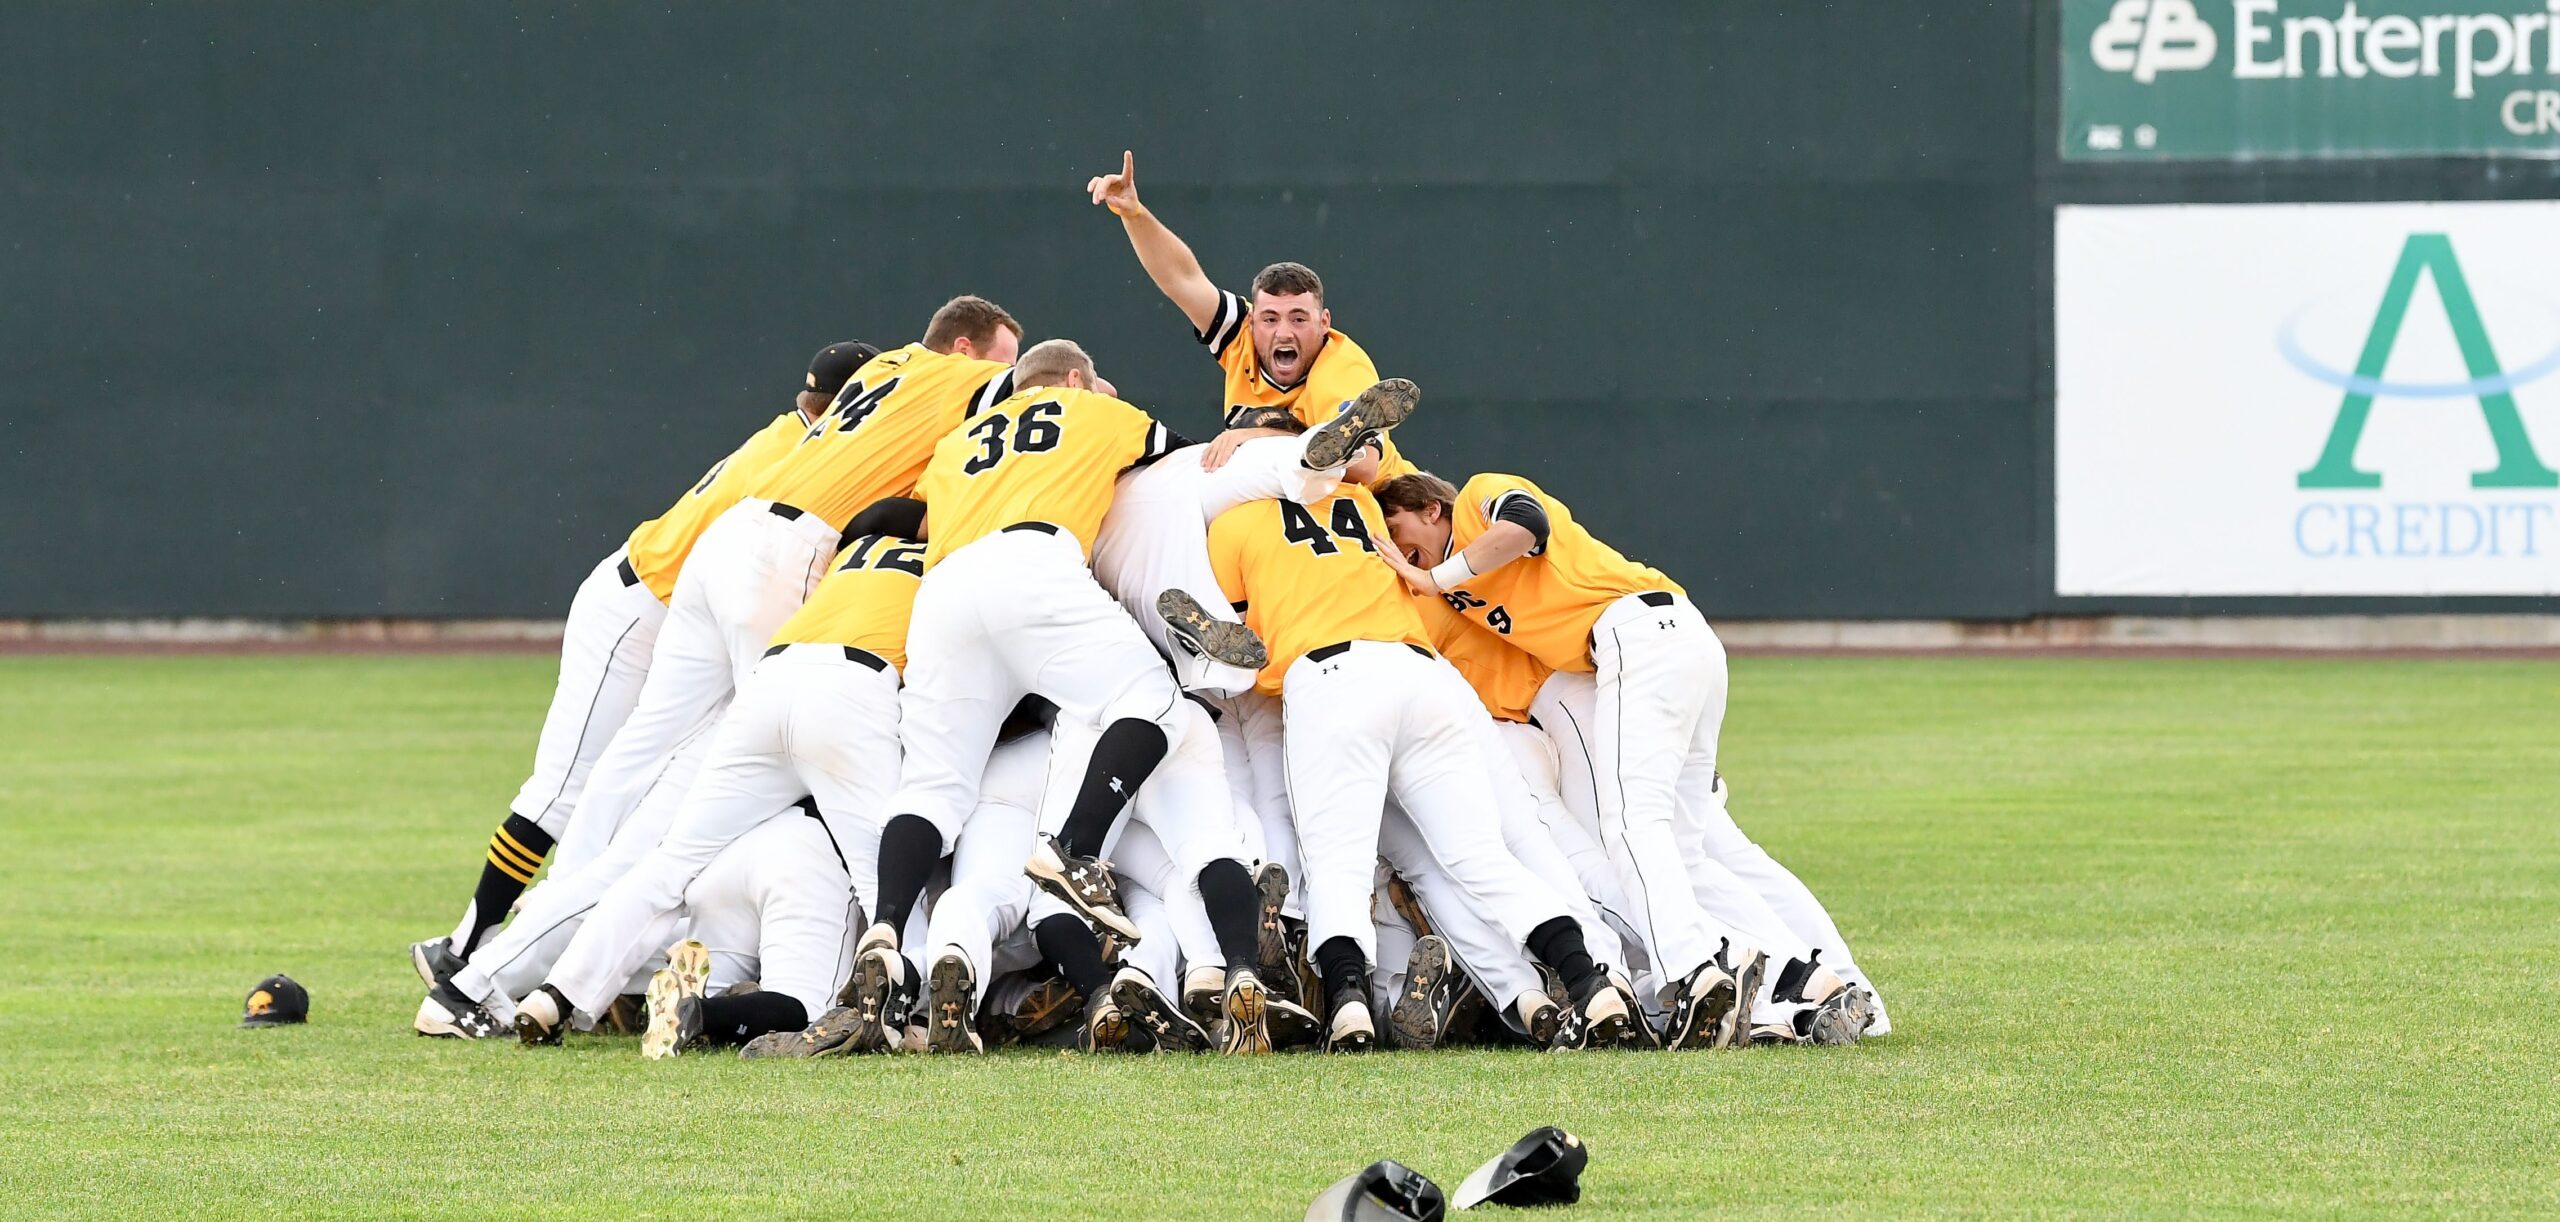 UMBC Baseball heads to NCAA tournament after winning first America East championship